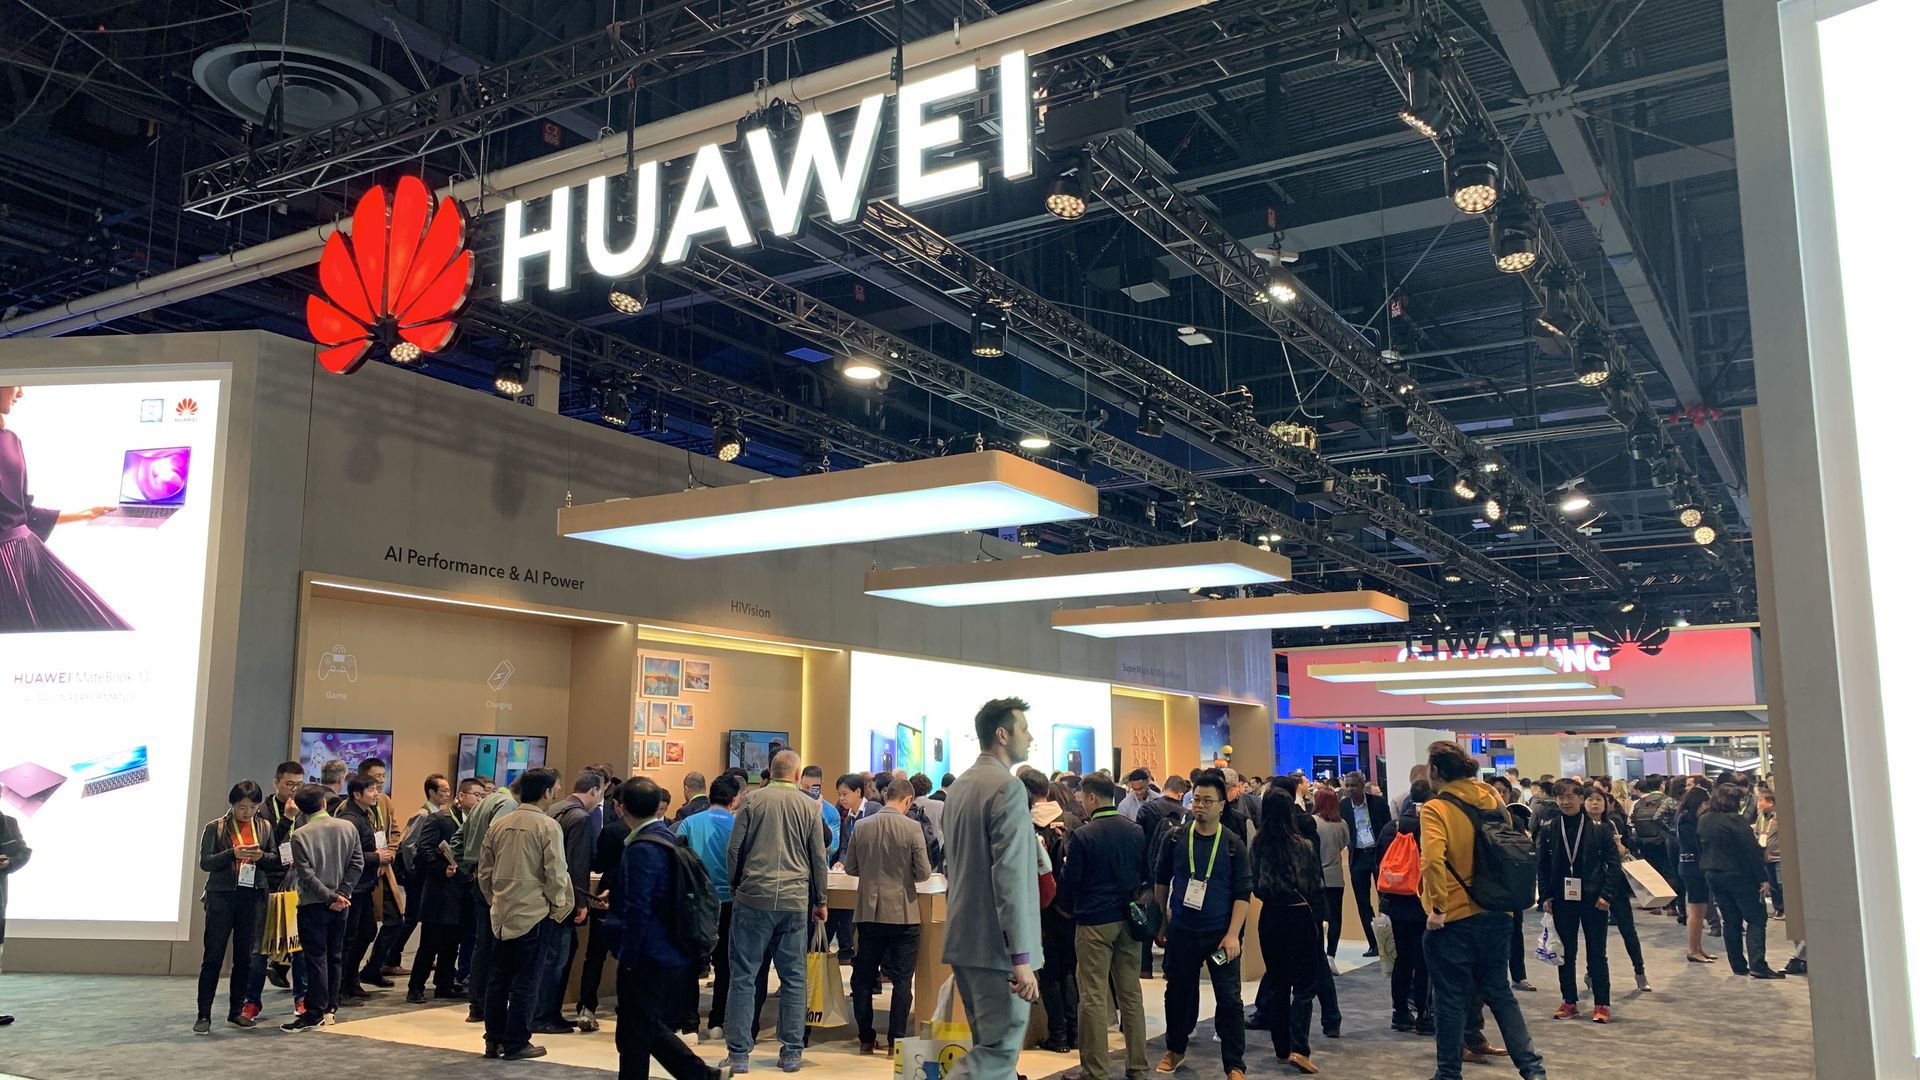 Huawei's booth at CES